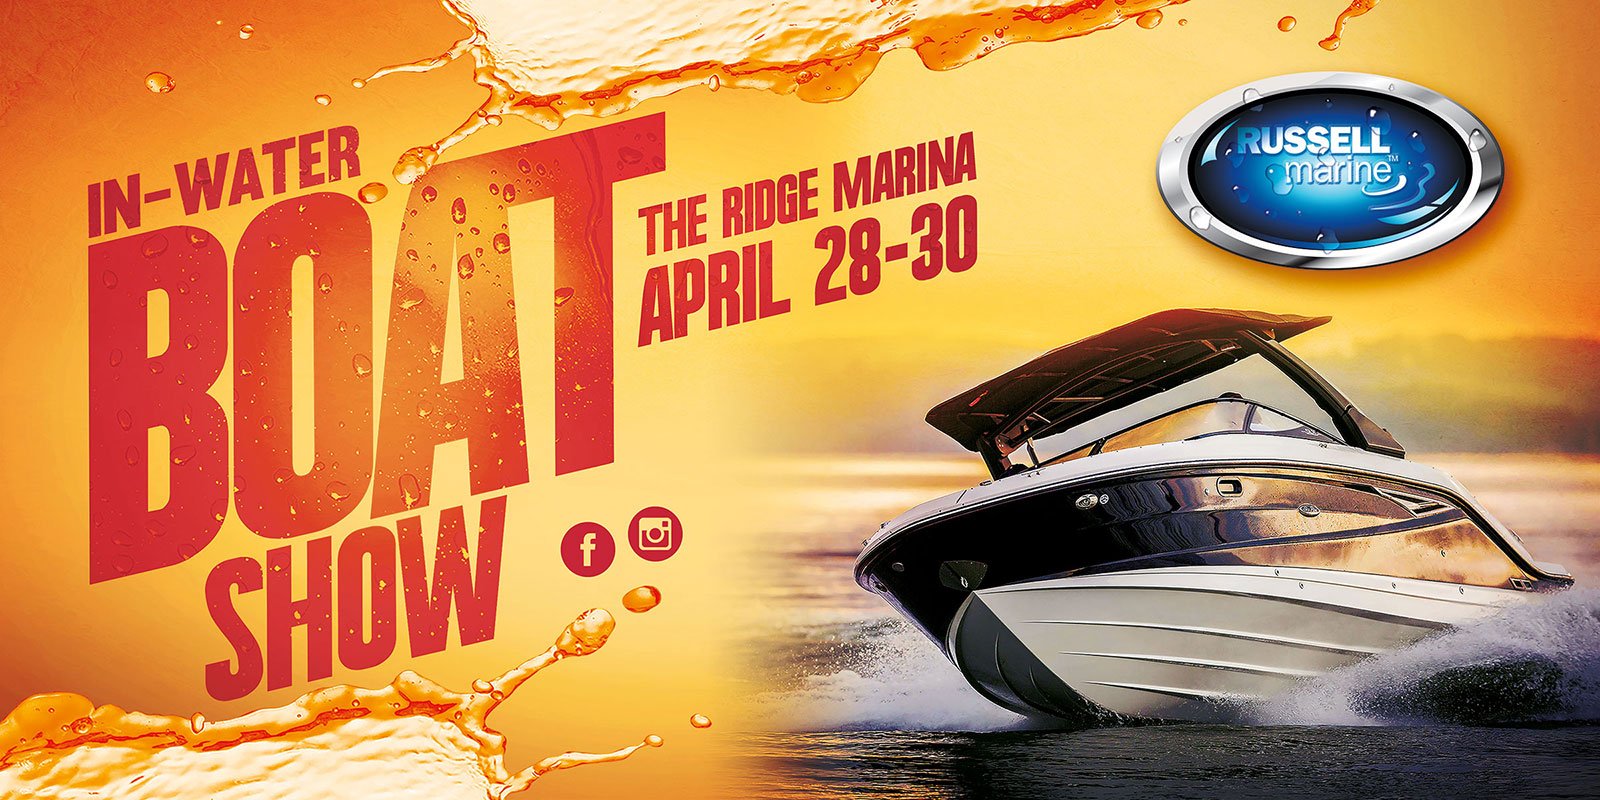 Russell Marine's InWater Boat Show is Back! Russell Lands